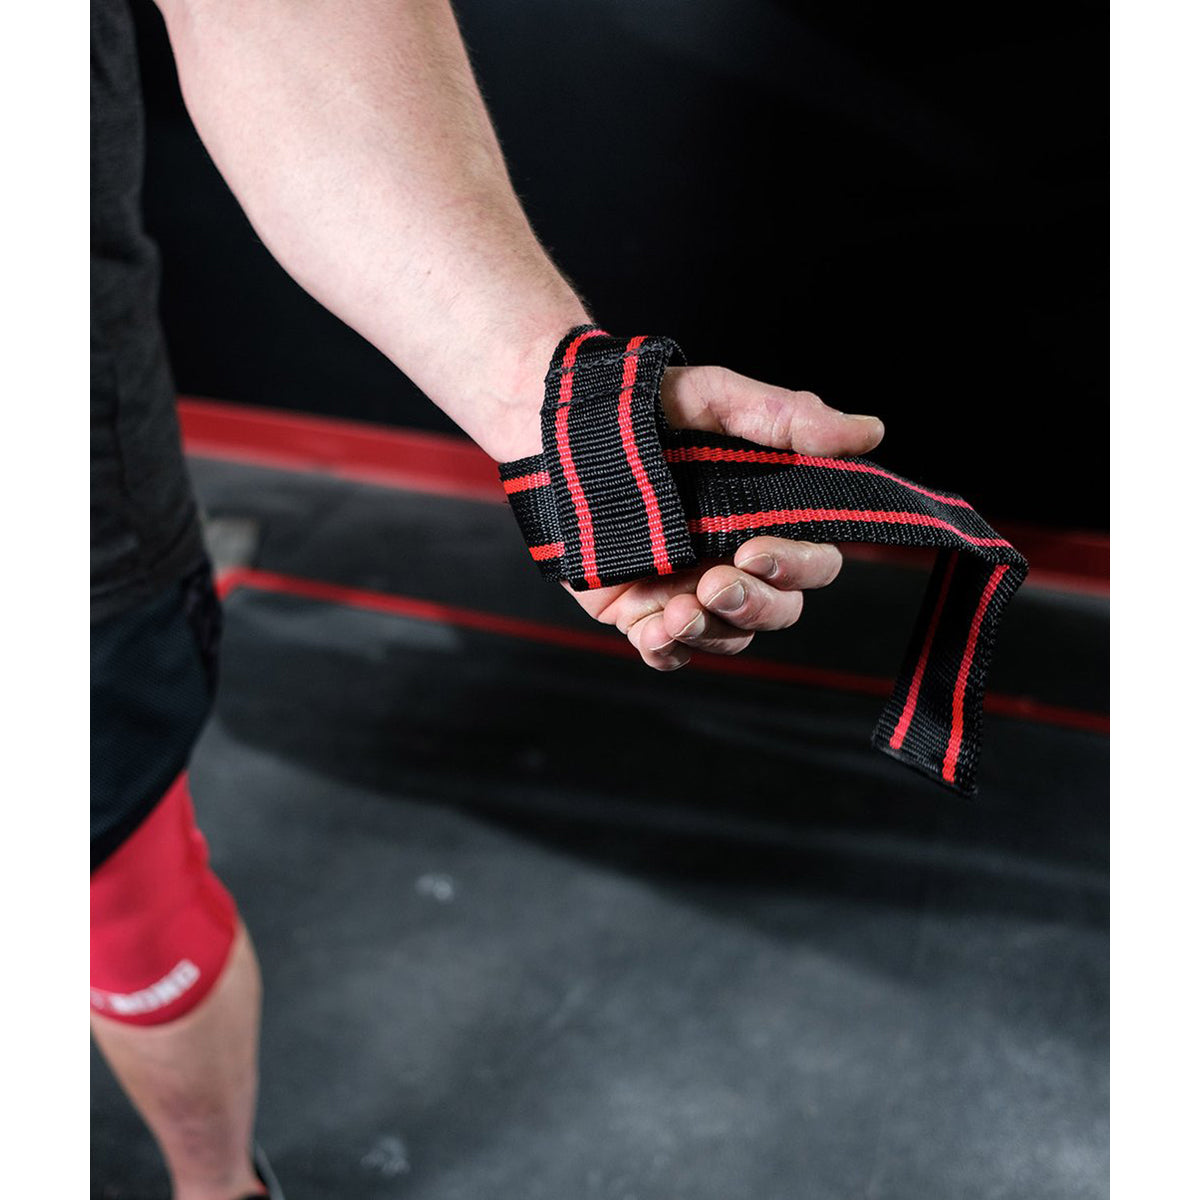 Sling Shot Super Heavy Duty Weight Lifting Straps by Mark Bell Sling Shot